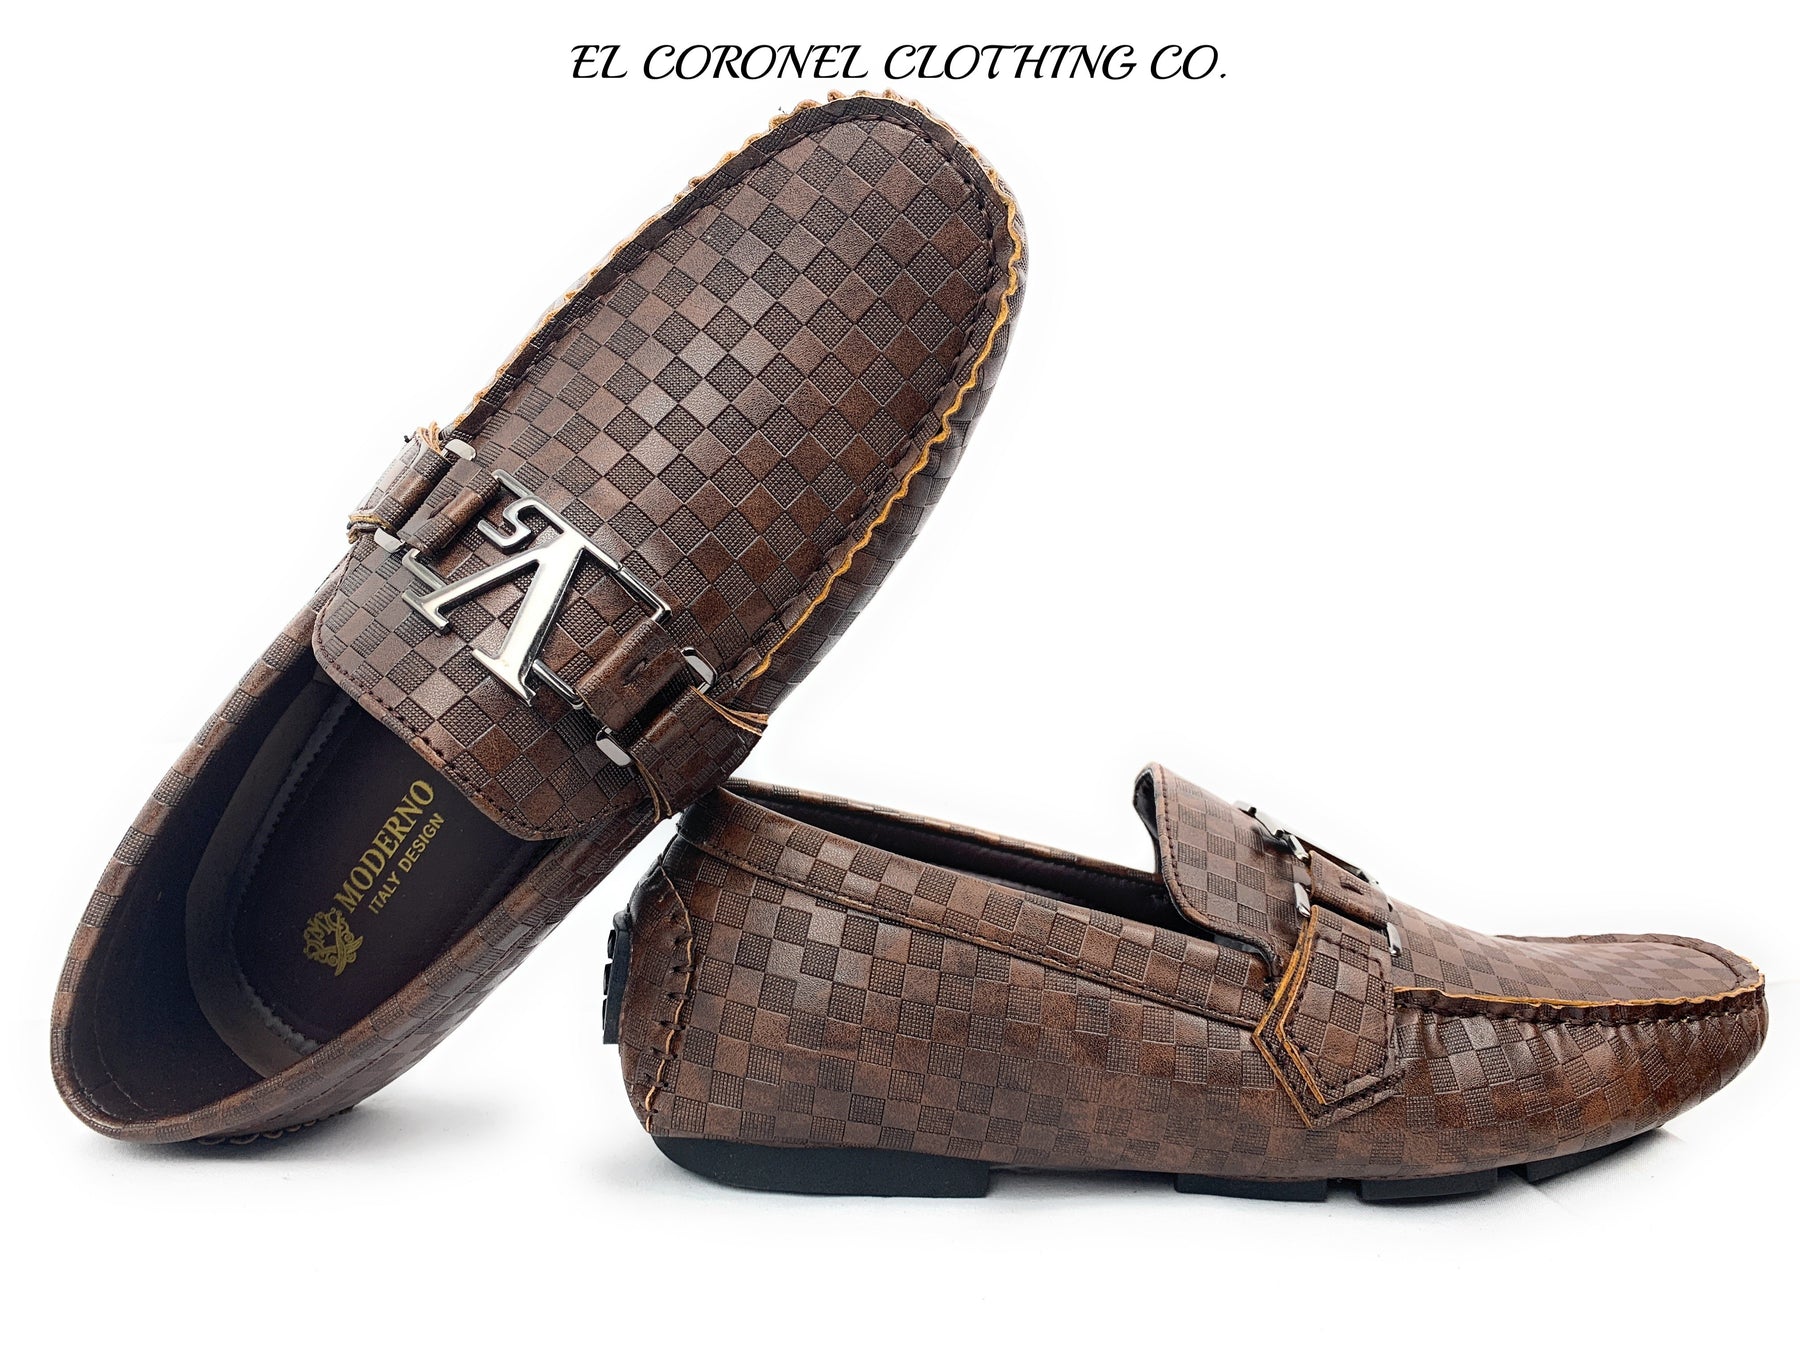 men's casual moccasin shoes